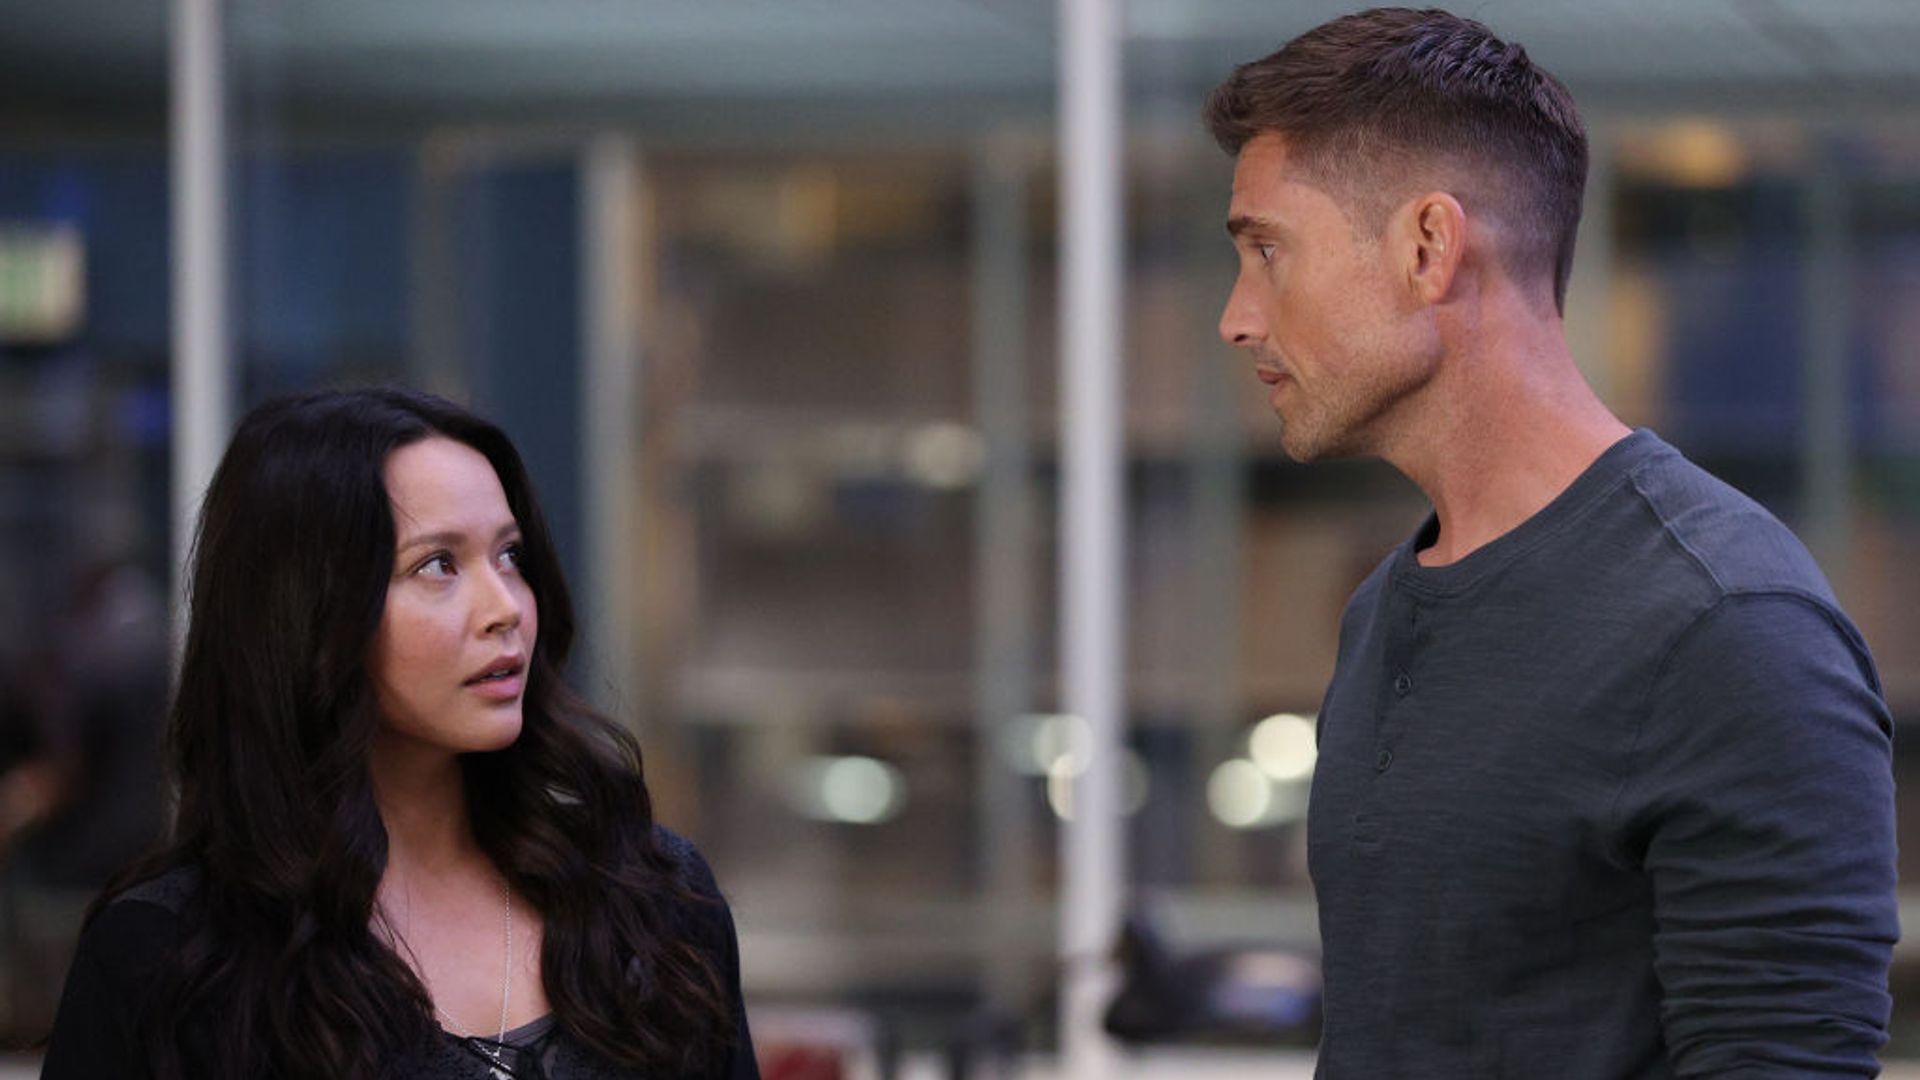 Eric Winter and Melissa O'Neill as Tim and Lucy in The Rookie